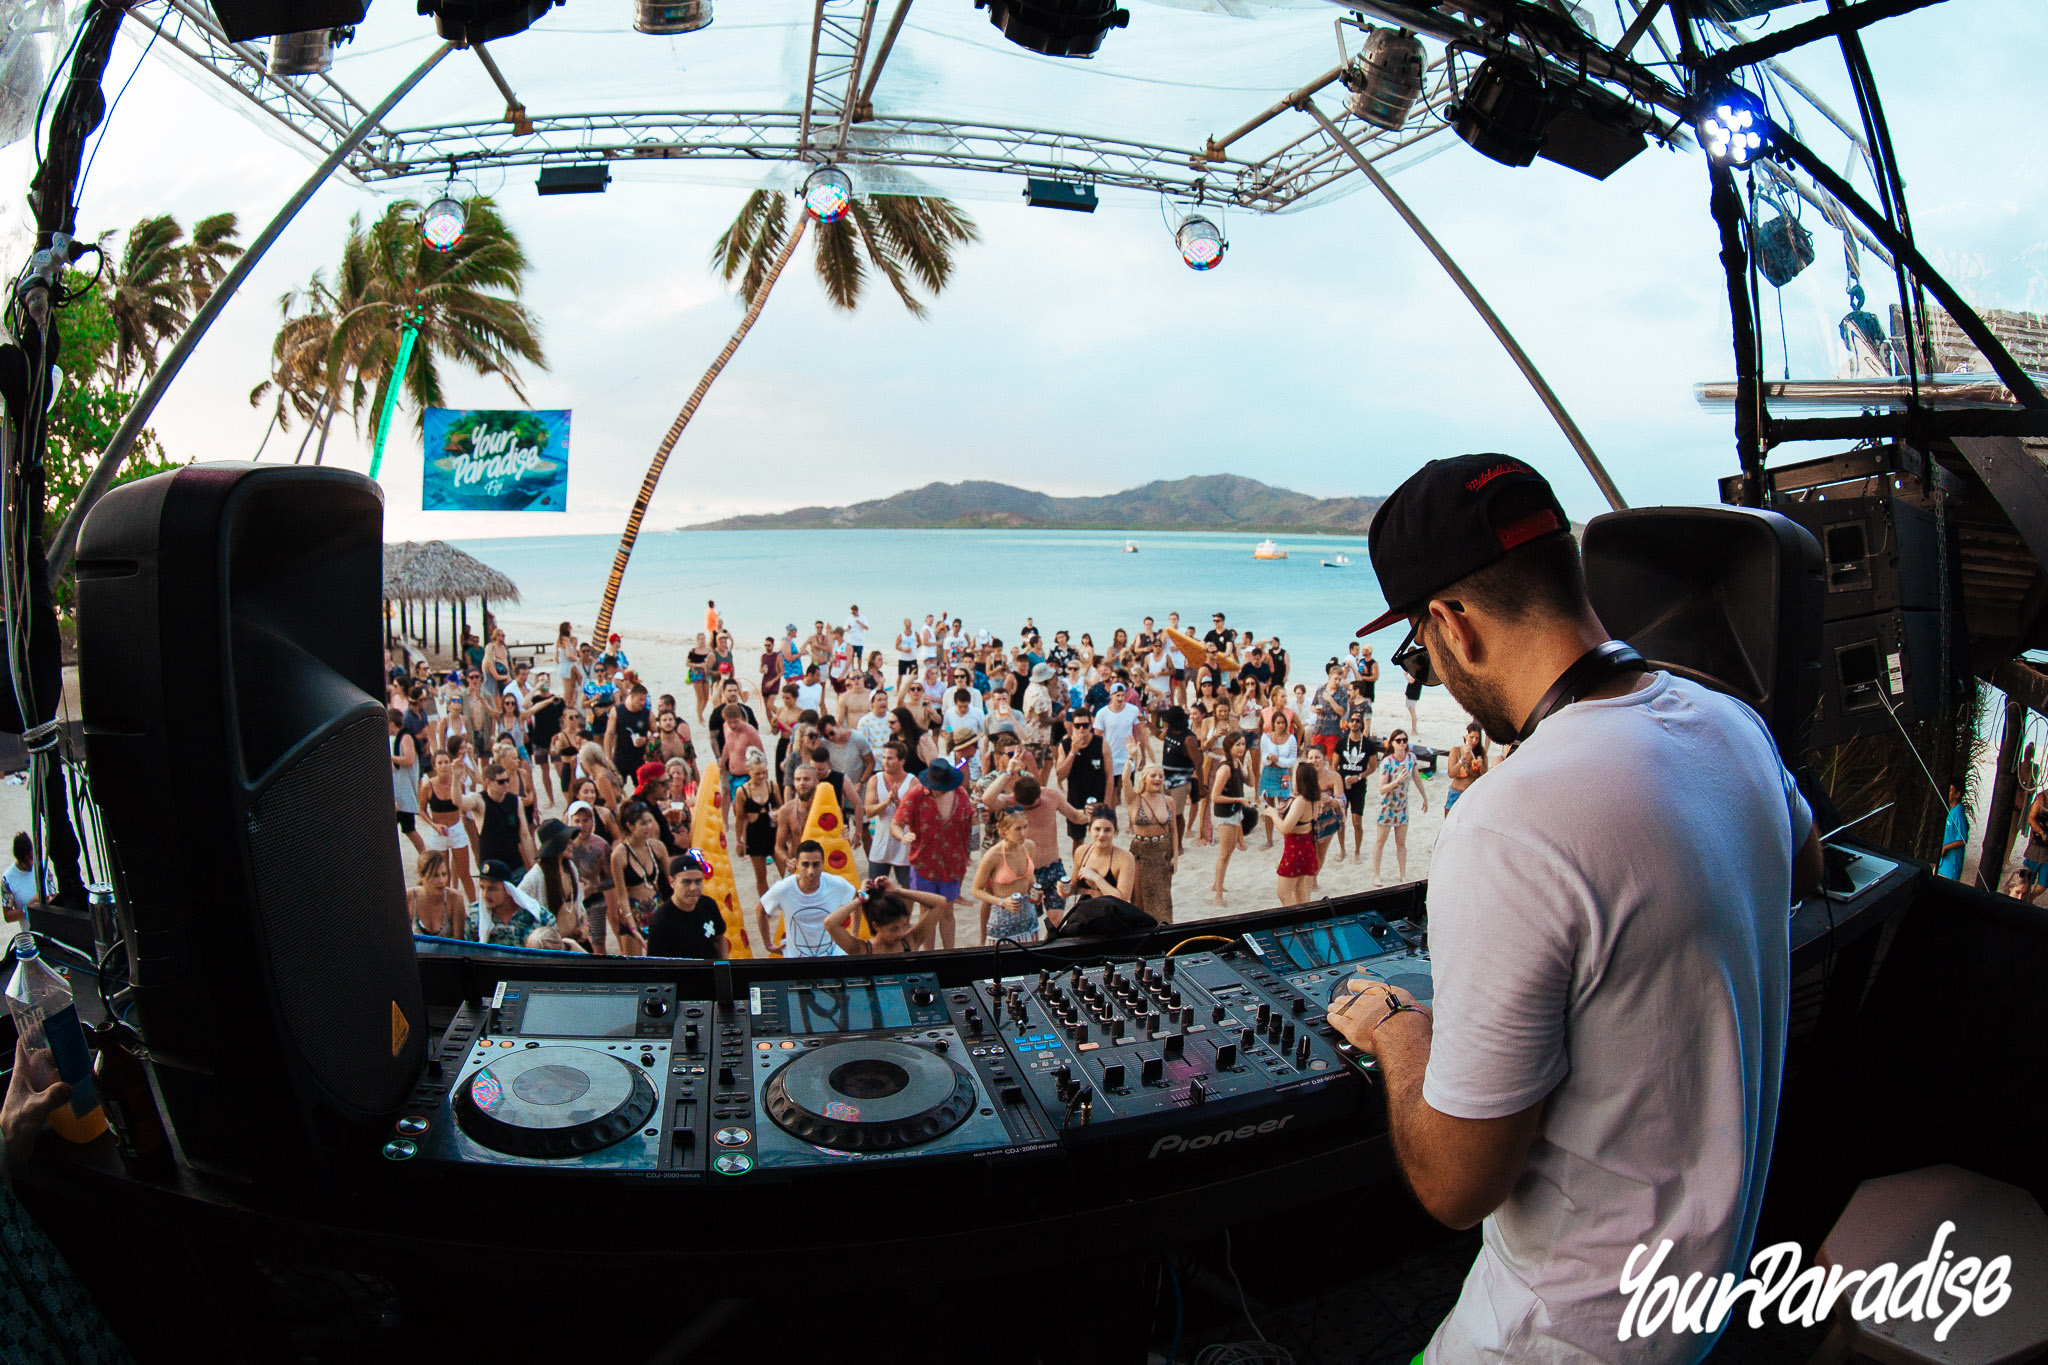 “Your Paradise” – a Festival our eyes love to see